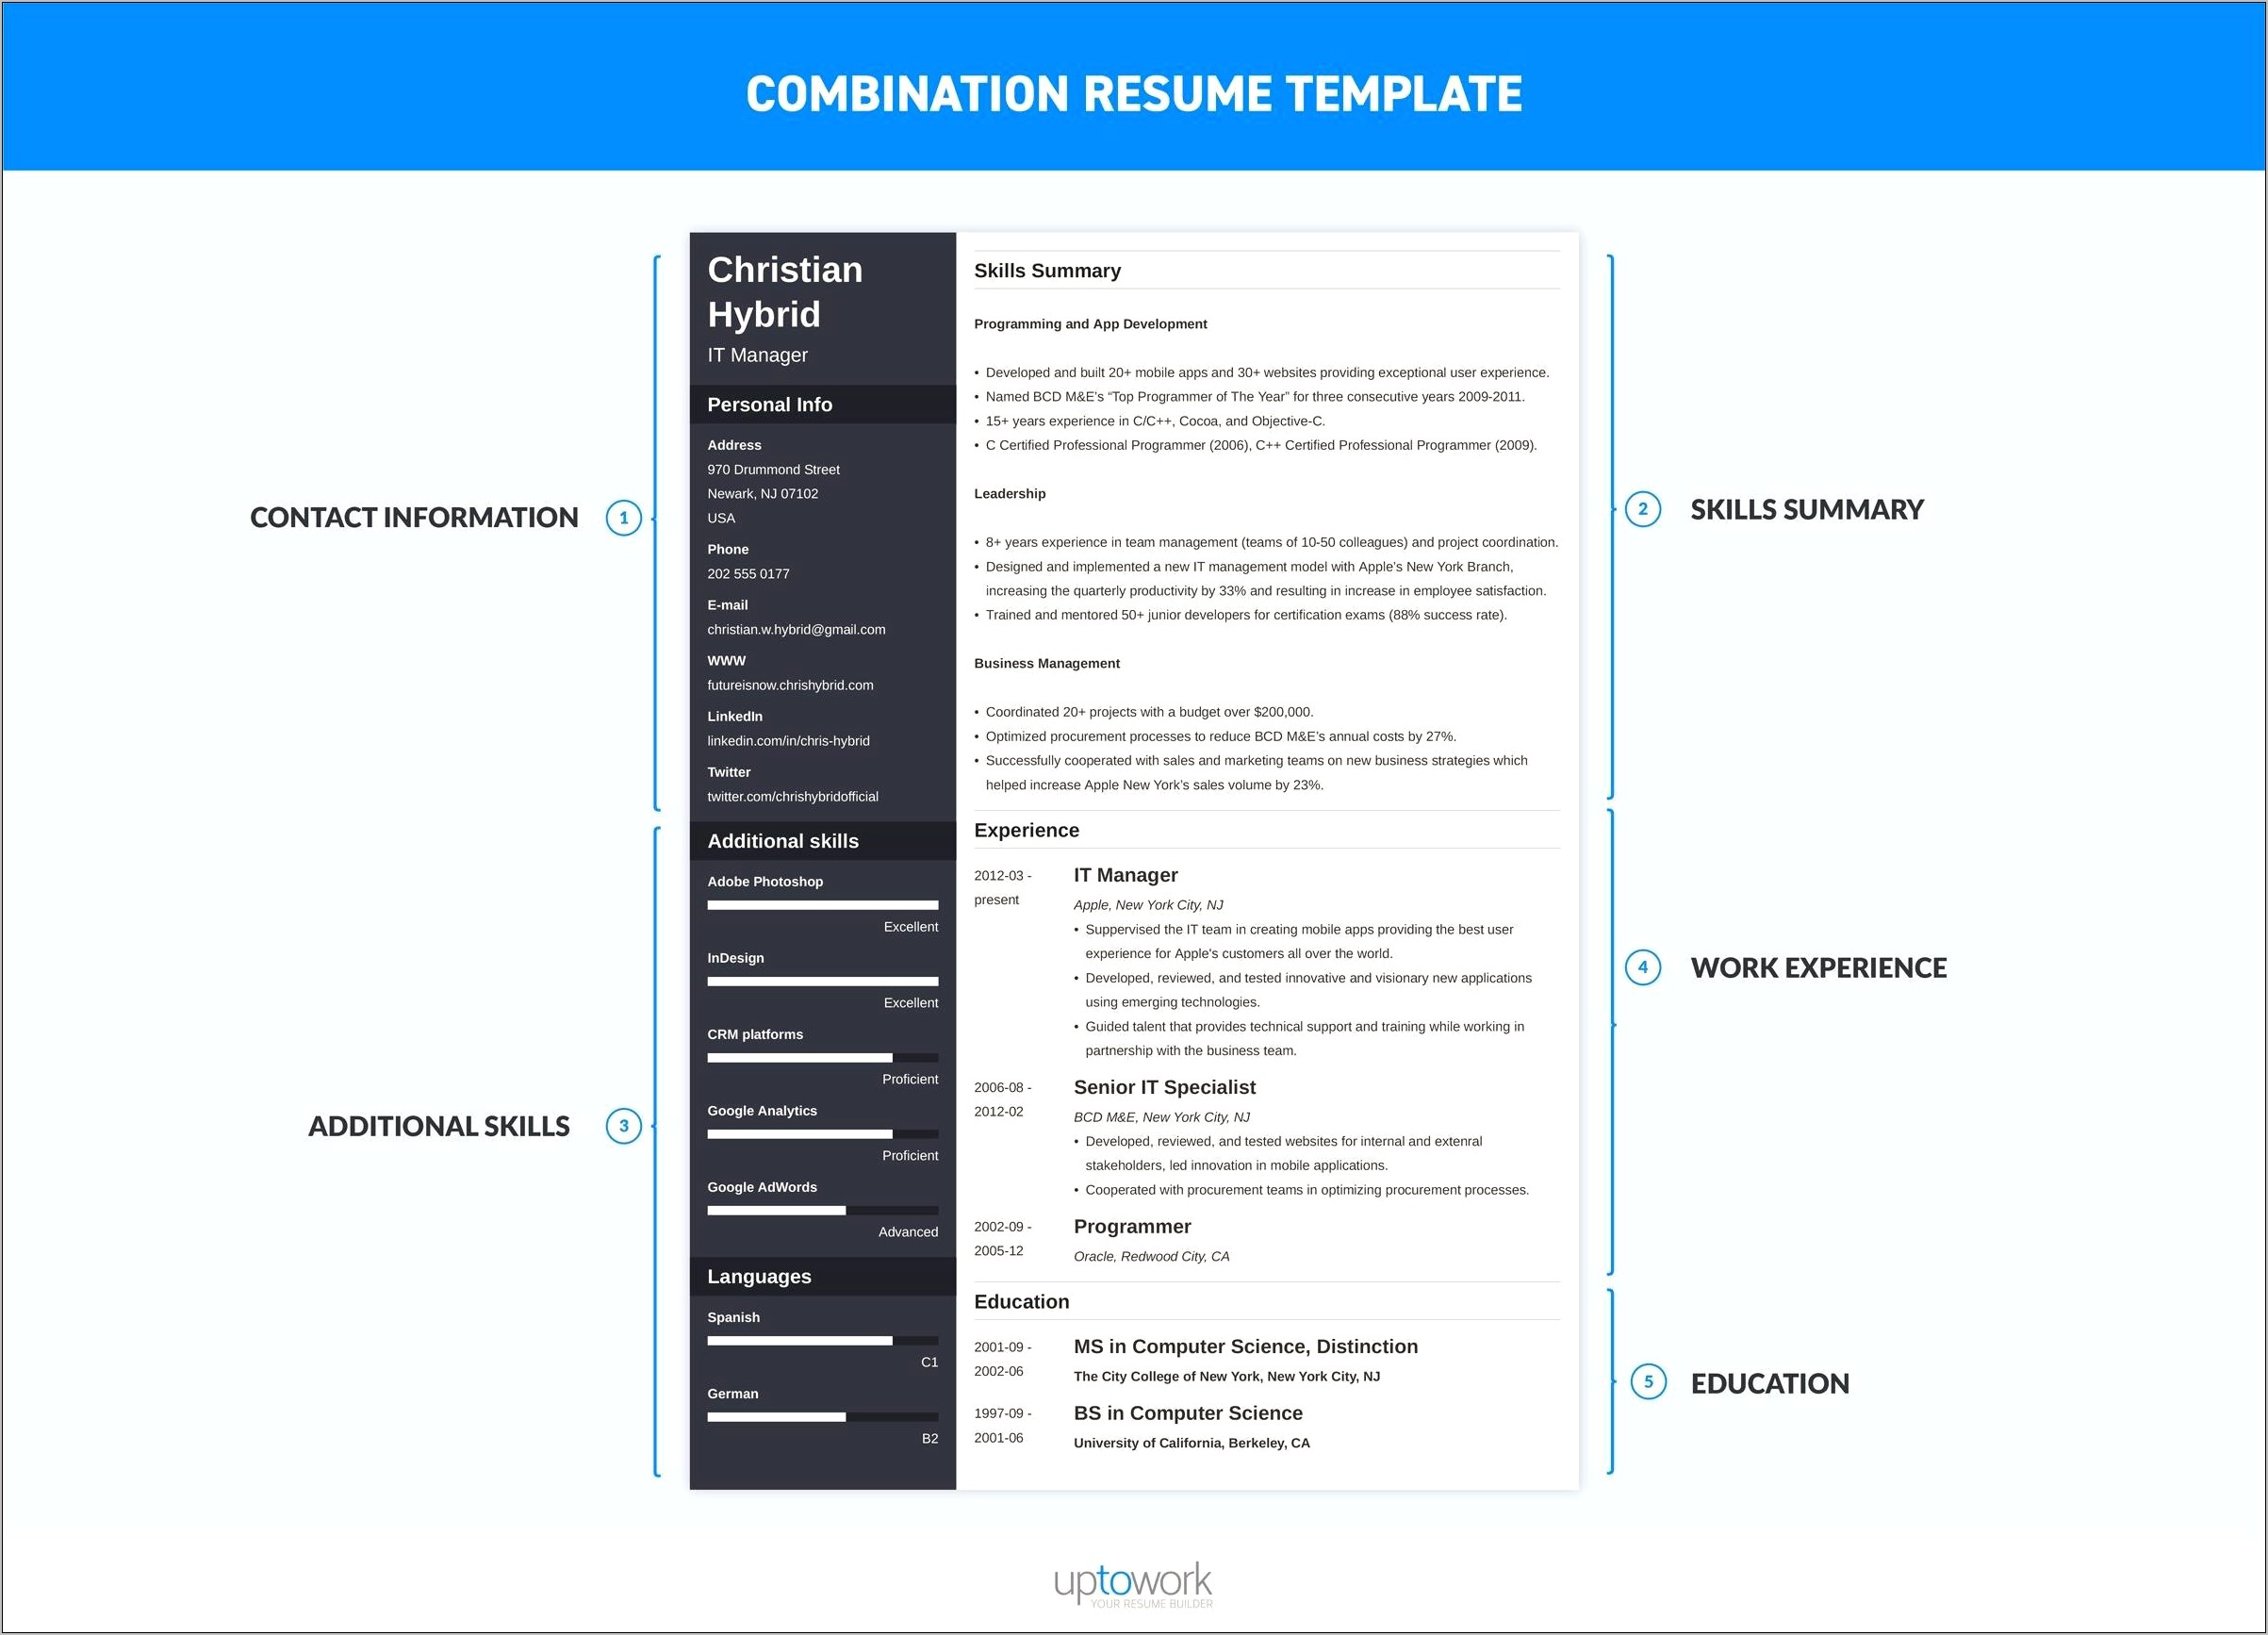 Combination Resume Examples For Teachers